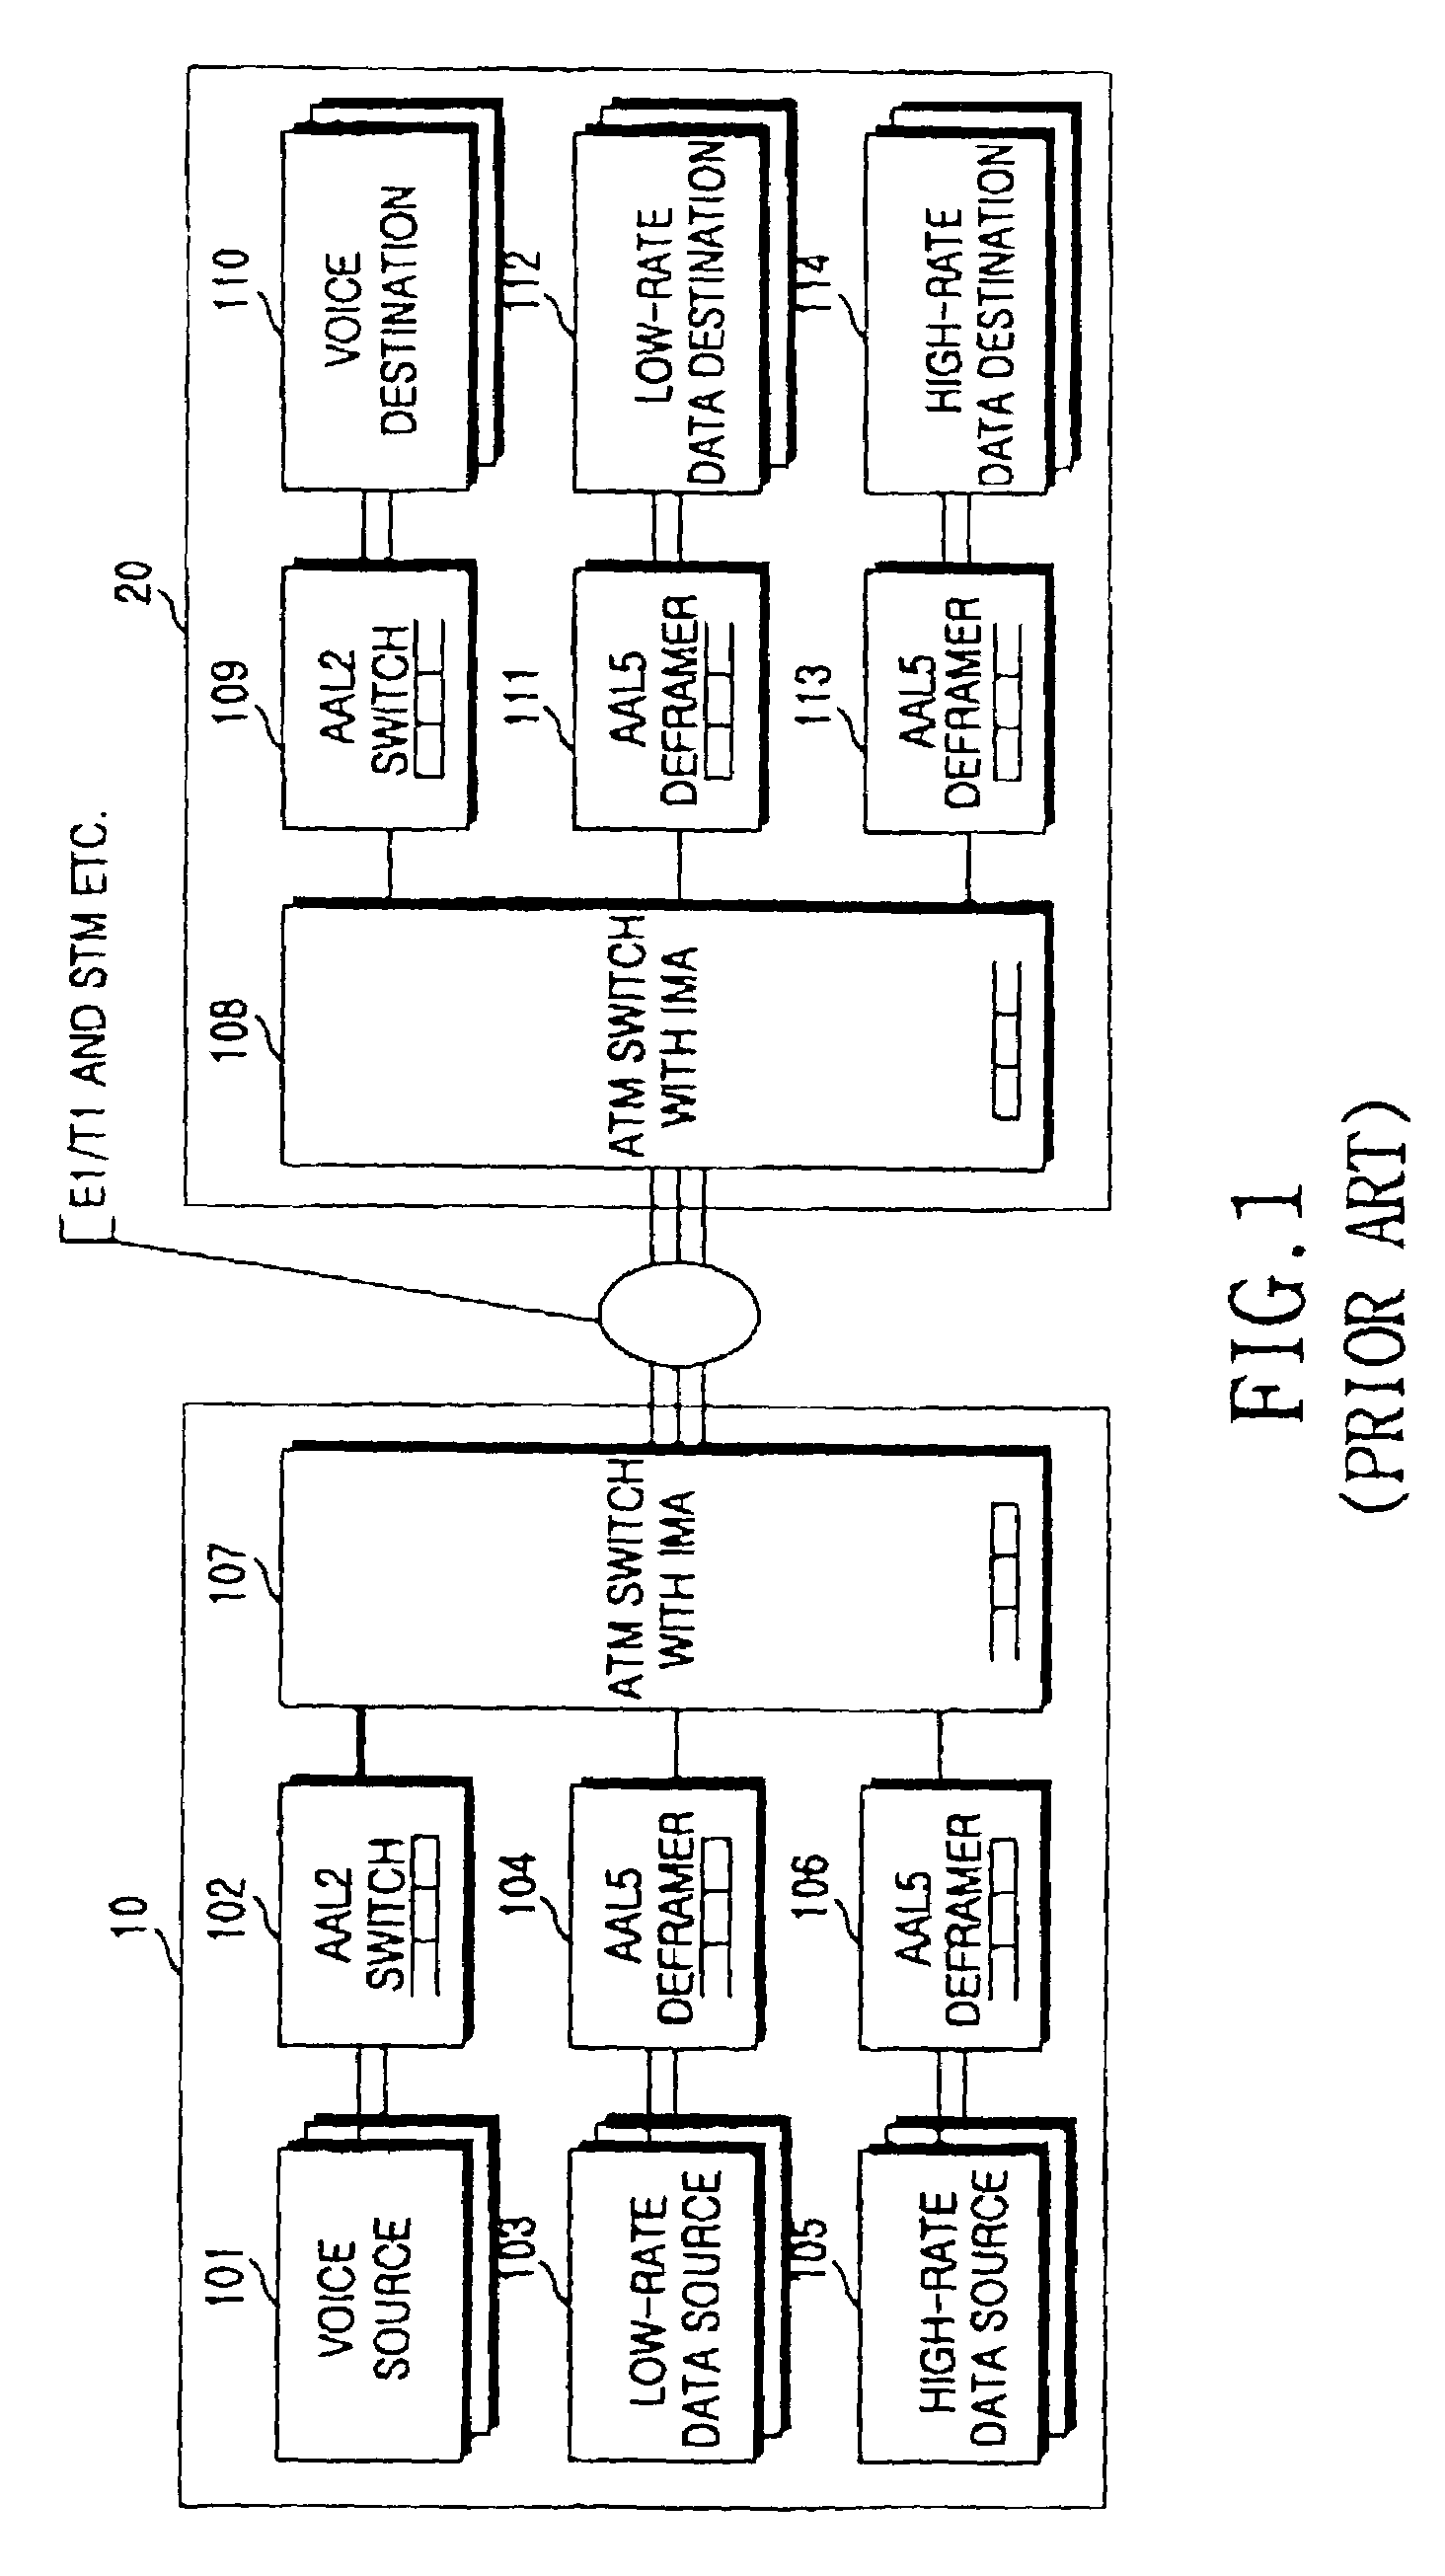 Apparatus and method for voice multiplexing in an asynchronous transfer mode network supporting voice and data service